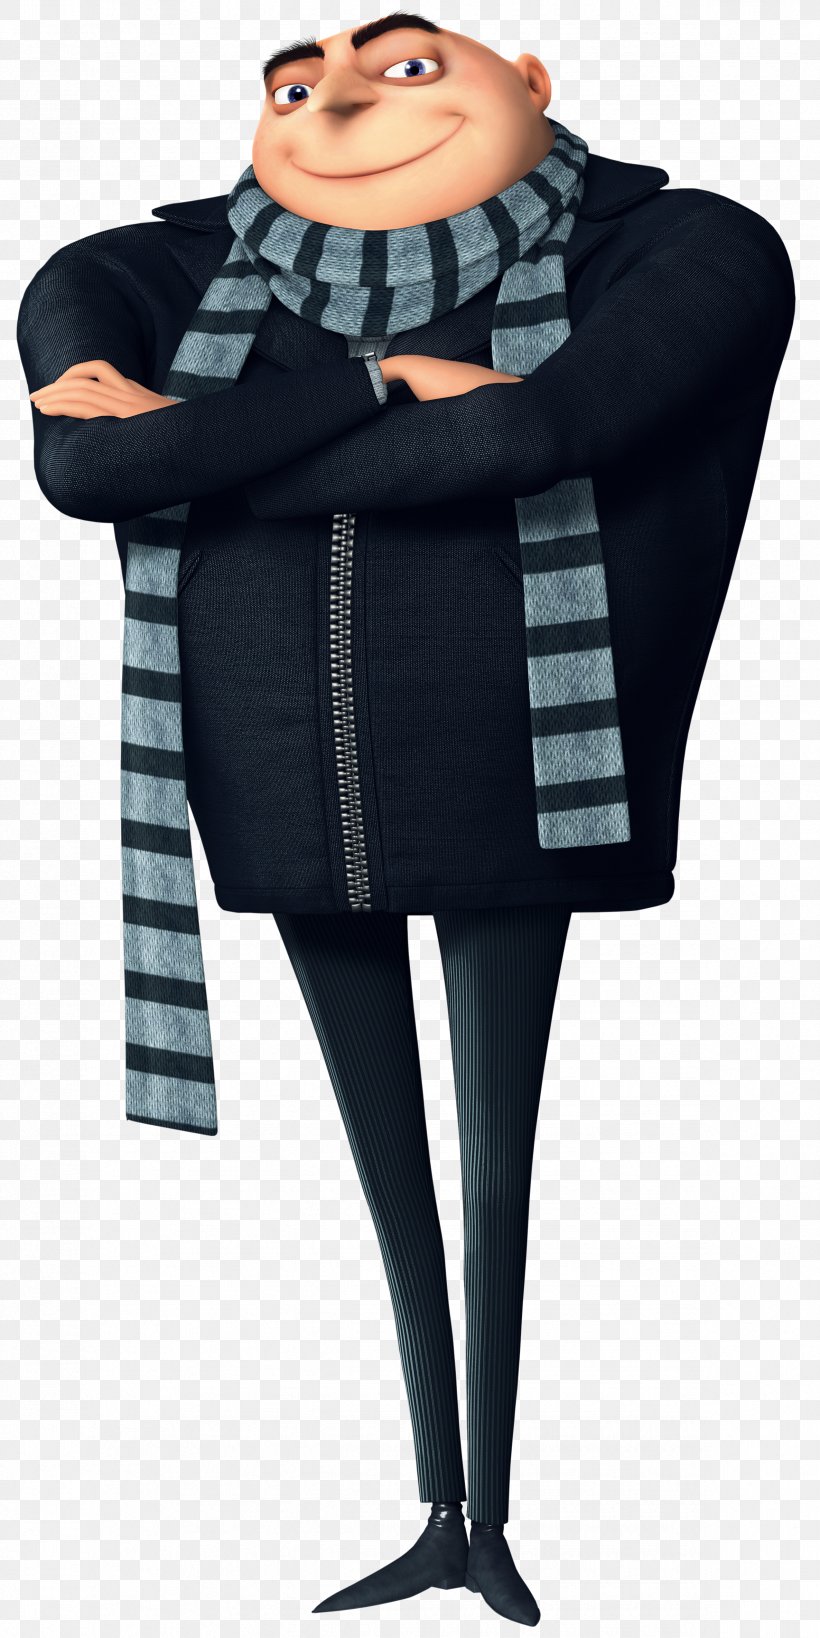 Despicable Me Felonious Gru Mr. Perkins Dr. Nefario Lucy Wilde, PNG, 2372x4741px, Steve Carell, Despicable Me, Despicable Me 2, Despicable Me 3, Dr Nefario Download Free